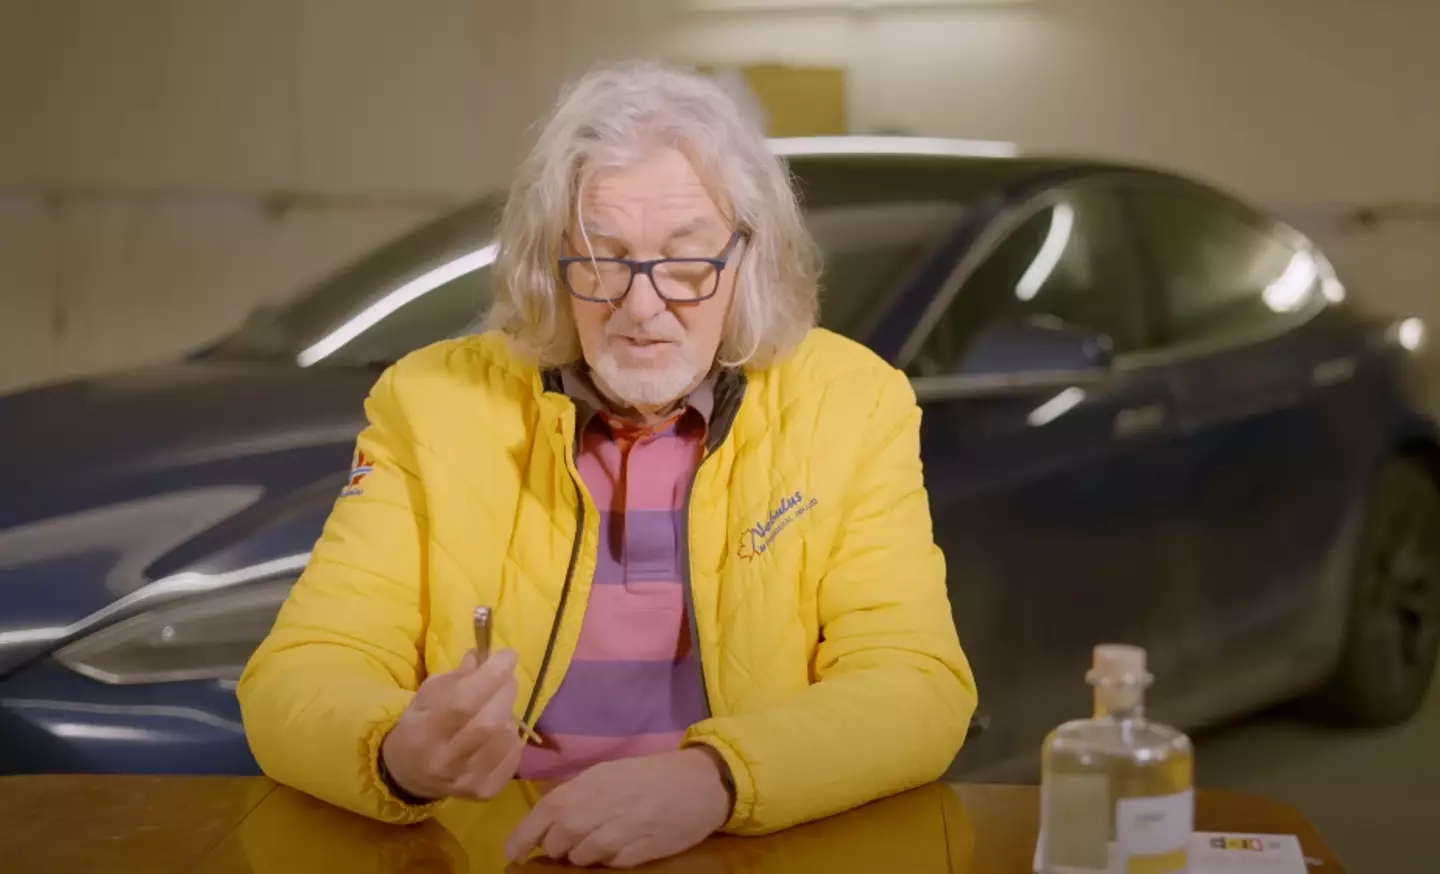 James May spoke about his essential items.